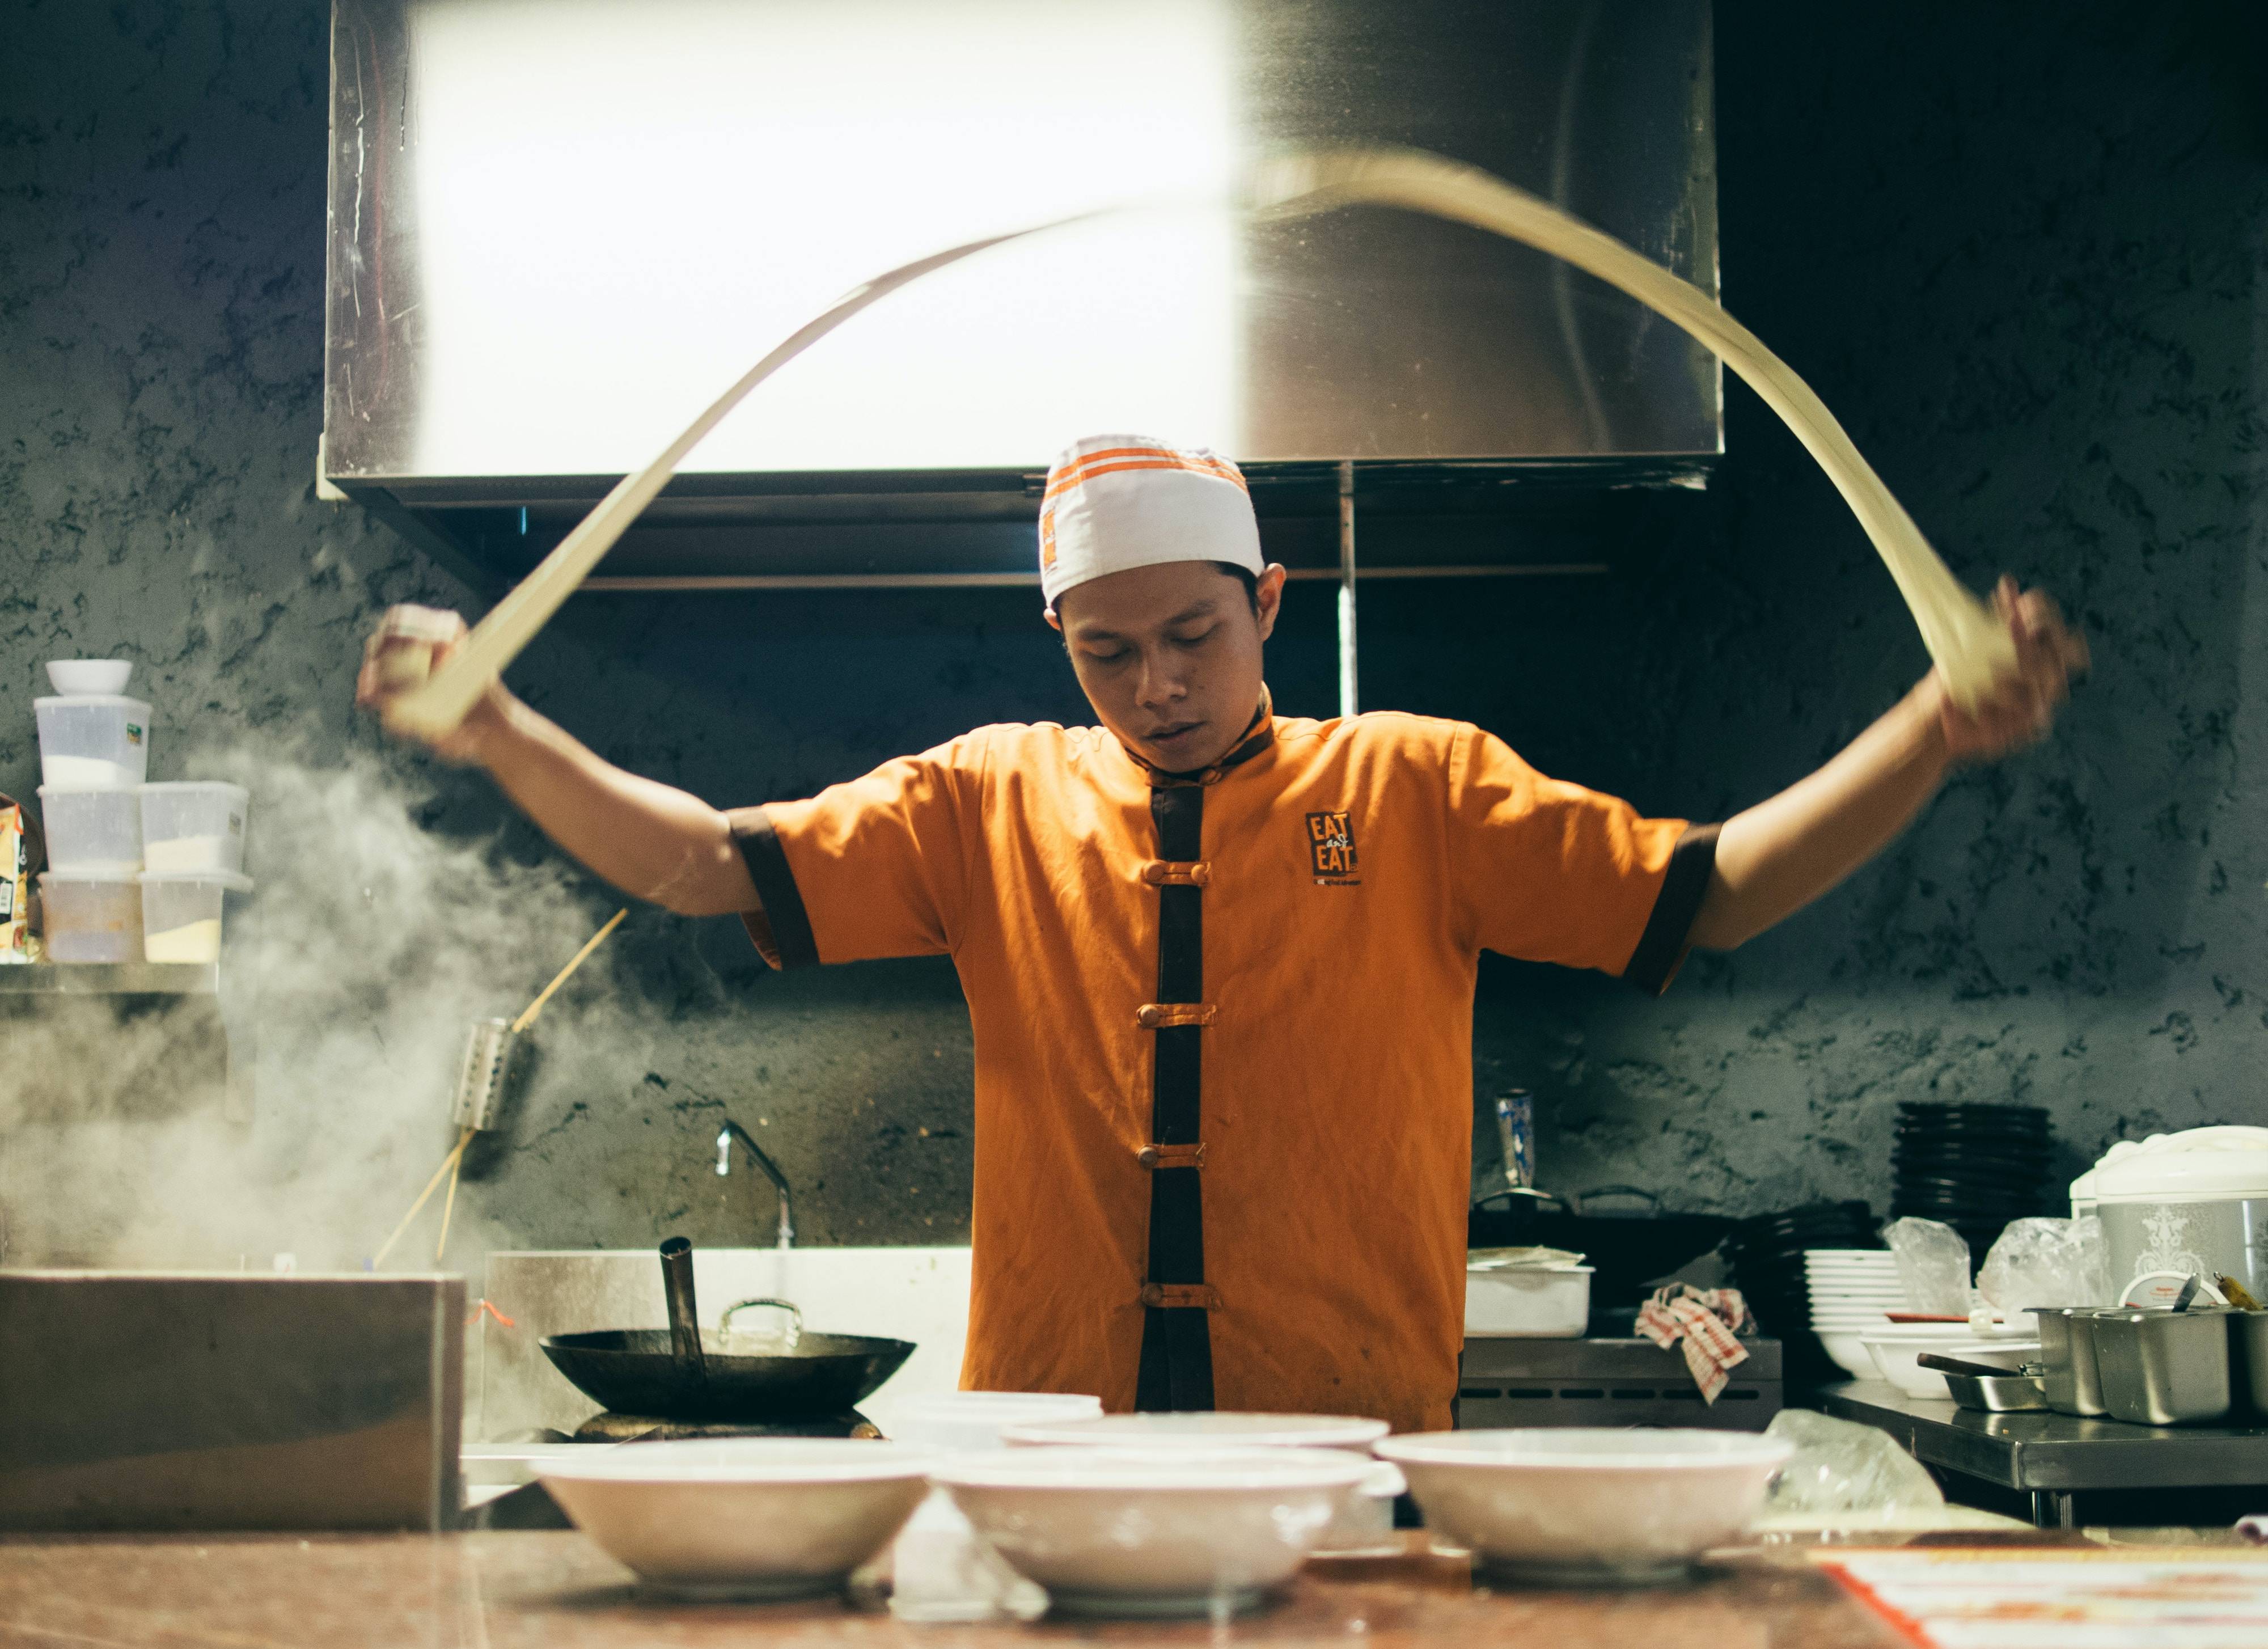 The Exciting Art Of Chinese Noodle-Making